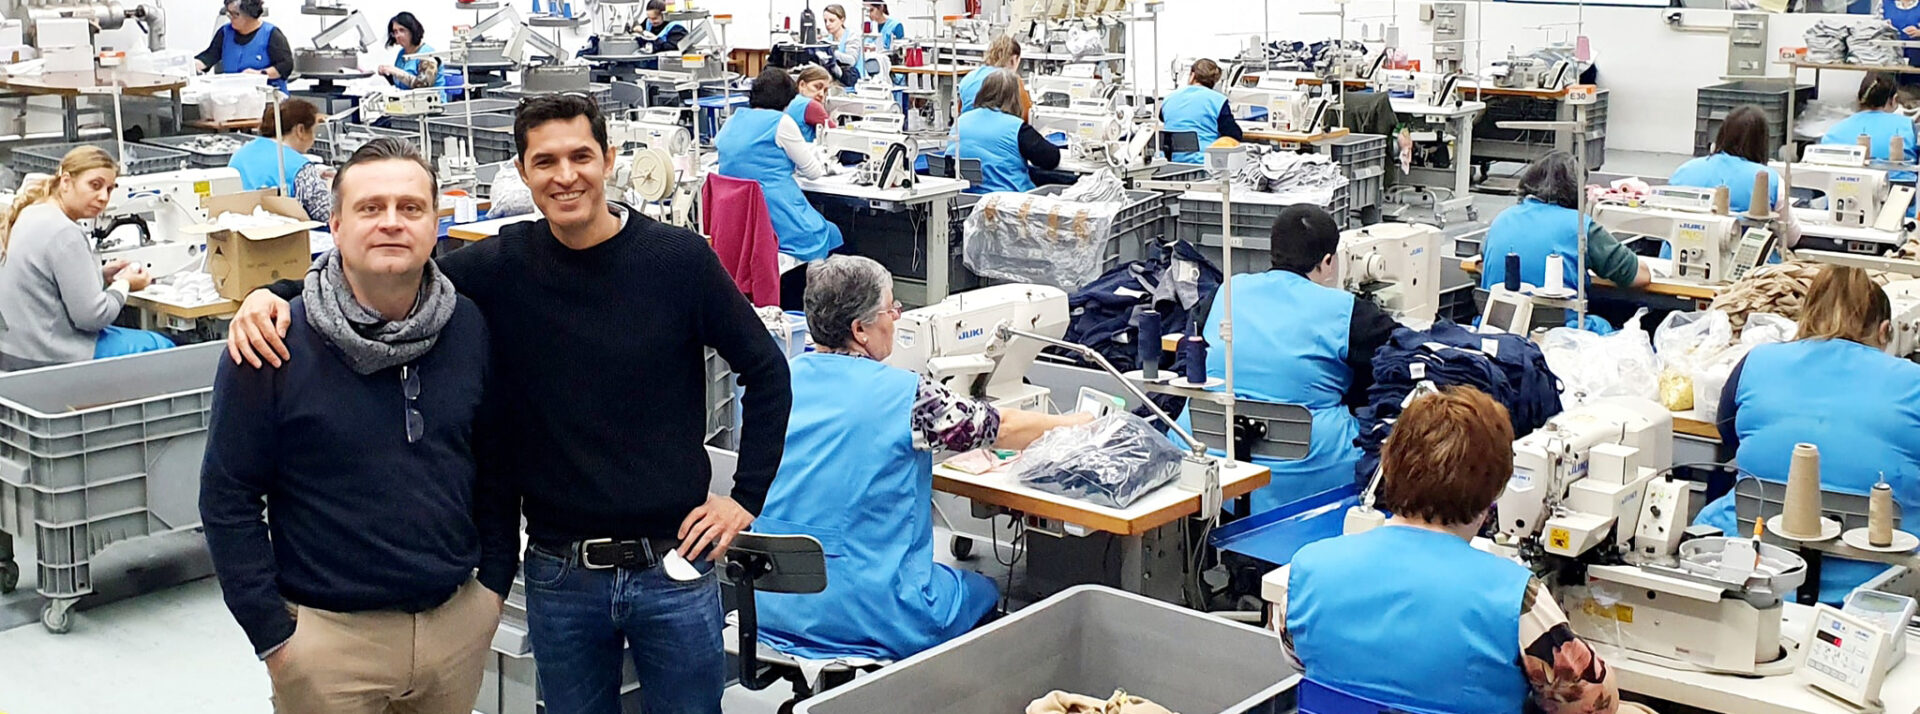 Clothing Manufacturers of HQ Textile in Portugal Create Fashion Brand